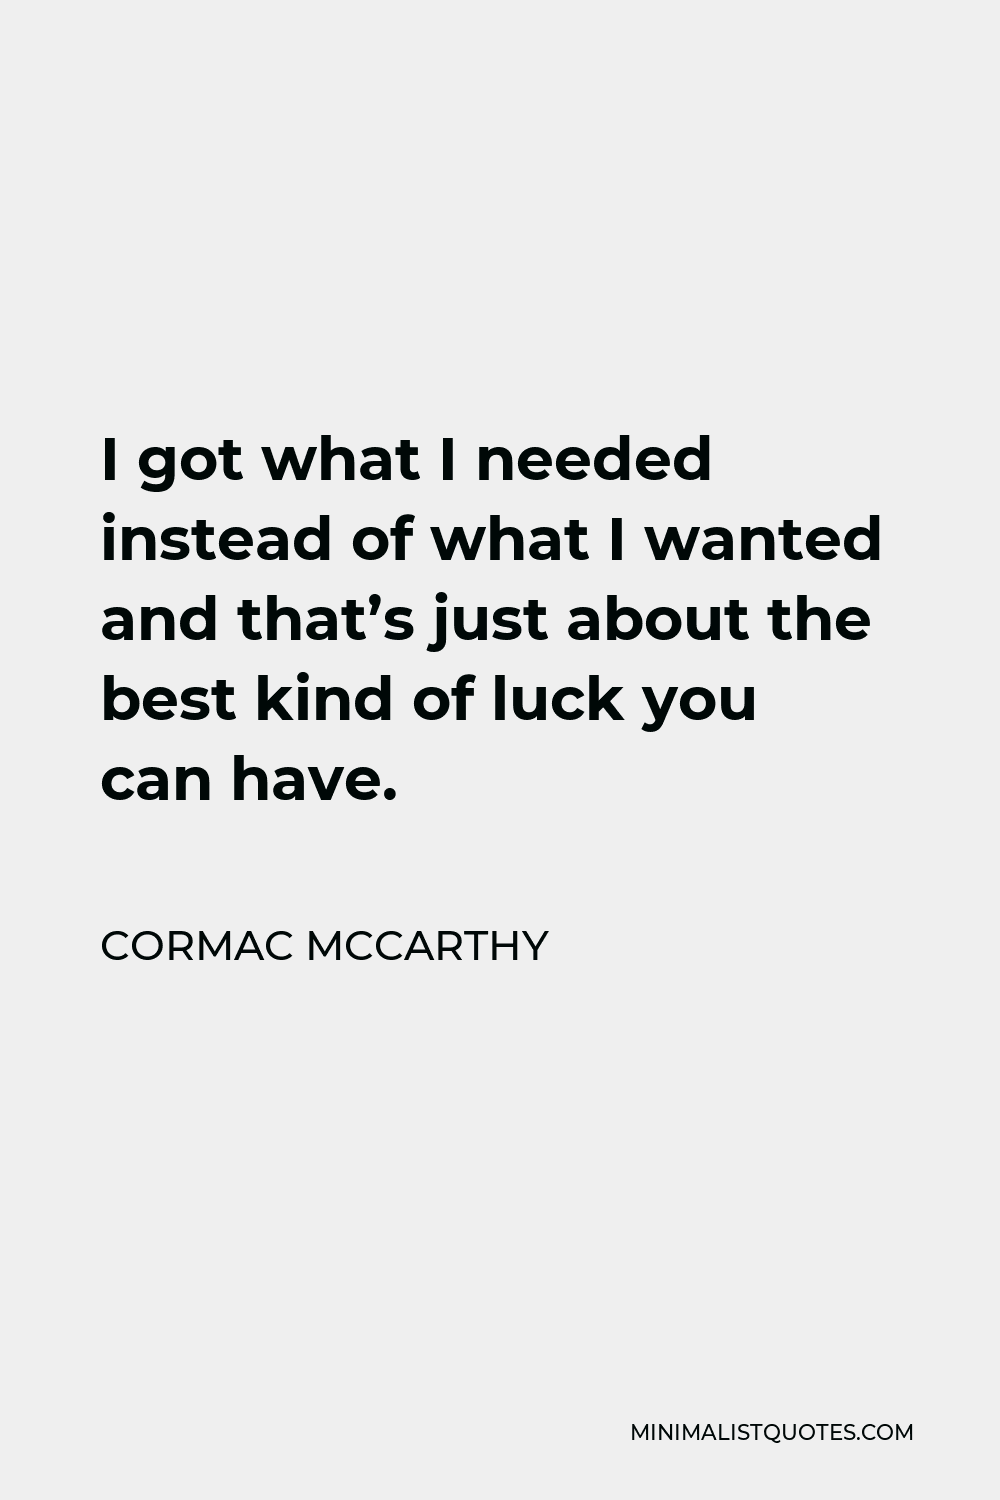 Cormac McCarthy Quote - I got what I needed instead of what I wanted and that’s just about the best kind of luck you can have.